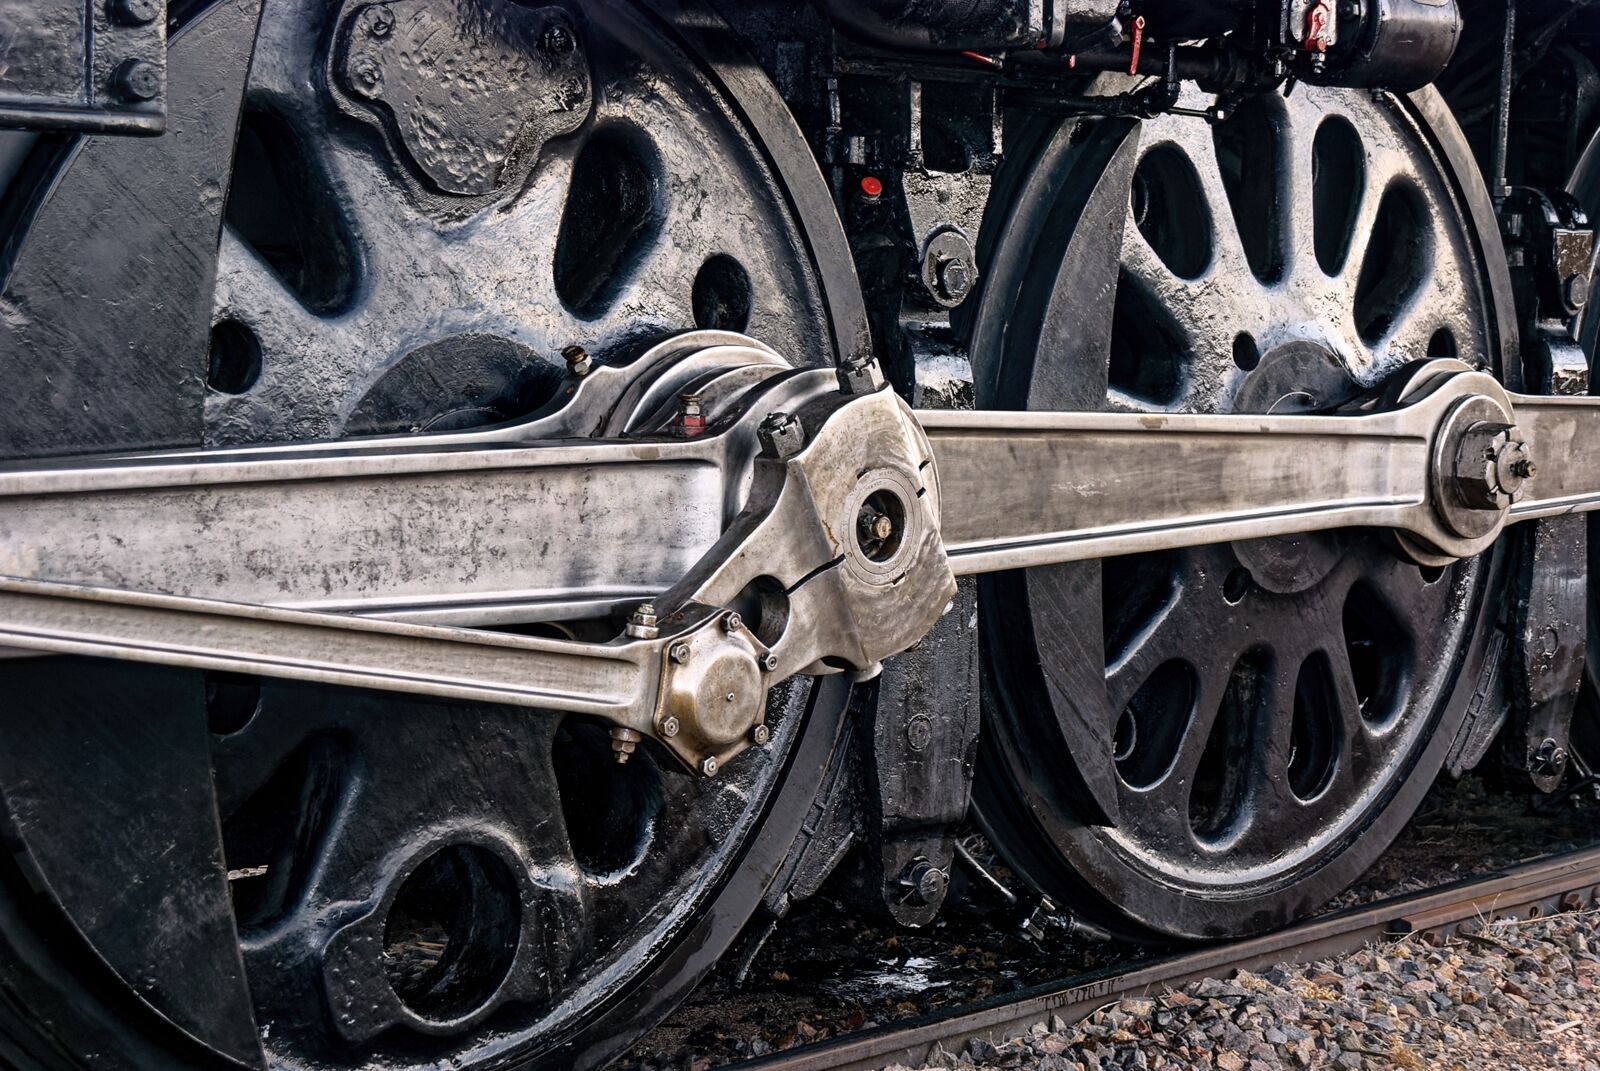 The drive wheels of Union Pacific #844. Taken at Denver's Union station in Denver Colorado.